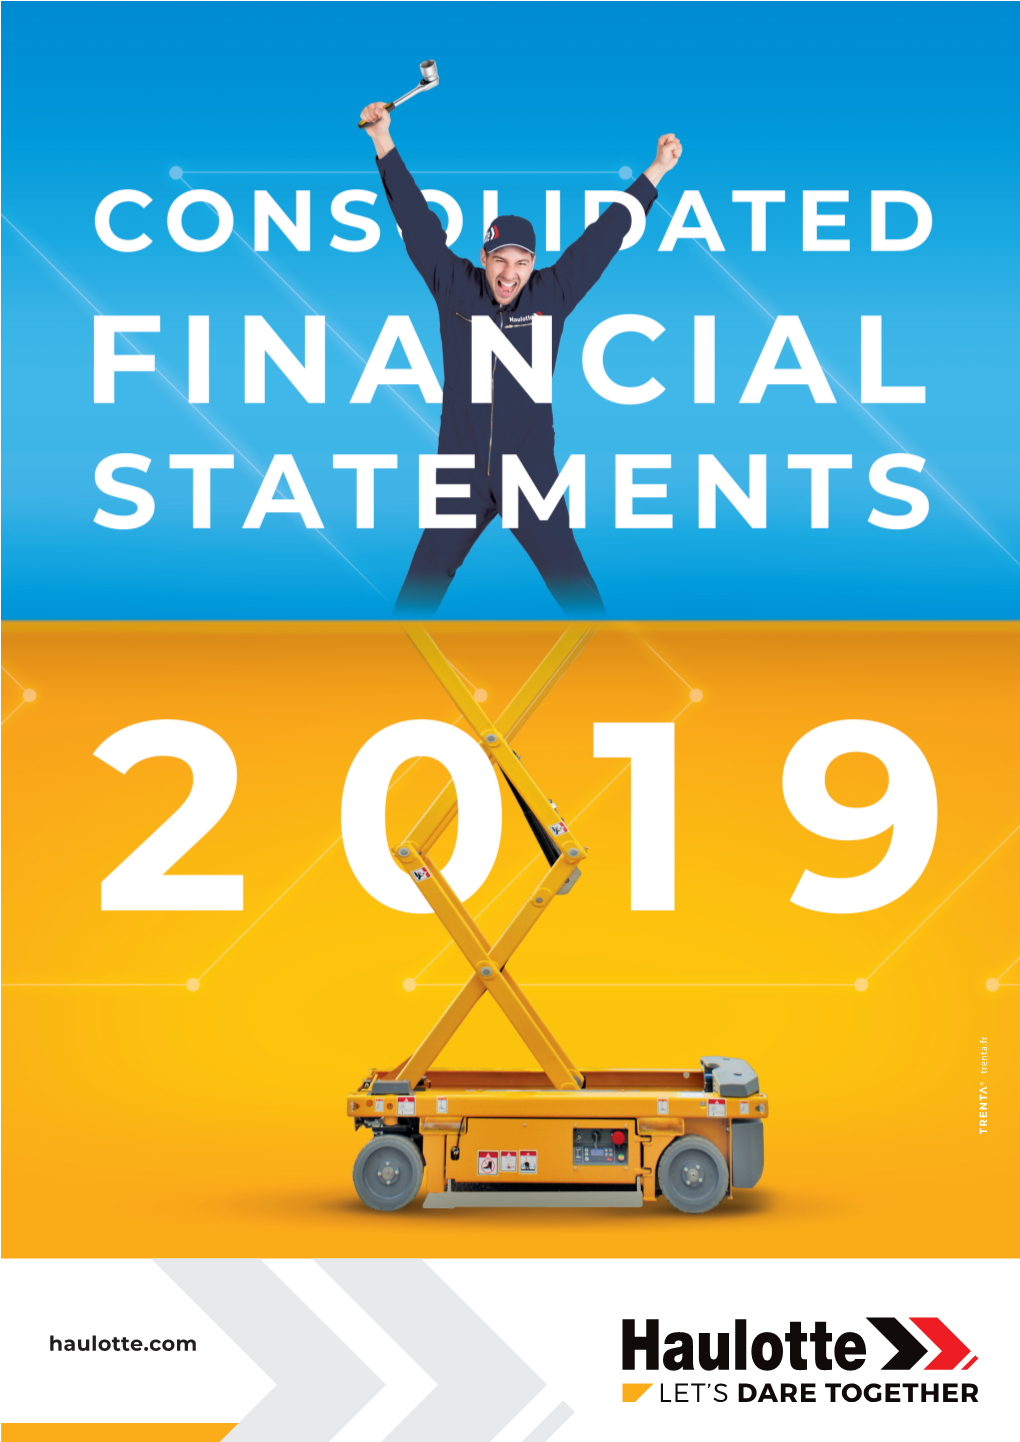 HAULOTTE 2019 Consolidated Financial Statements